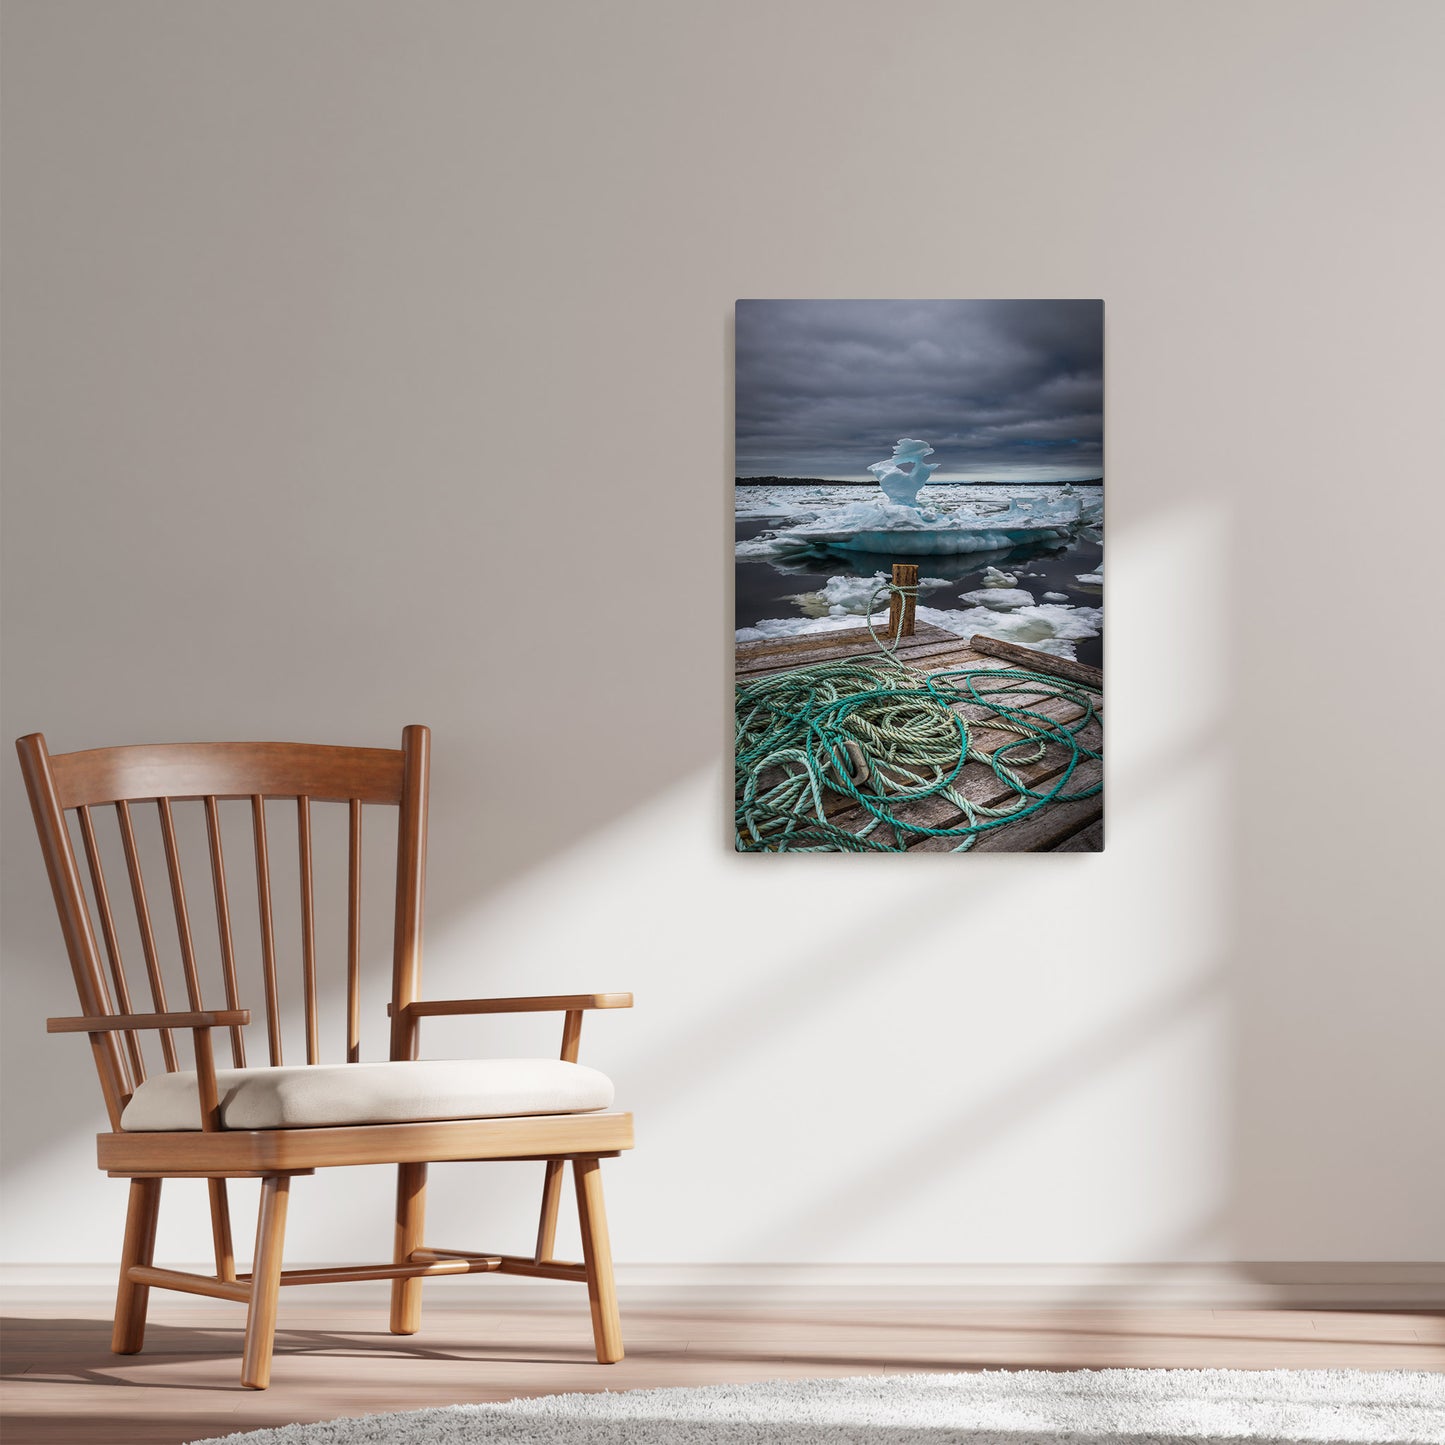 Ray Mackey's Boyds Cove Ice Angel photography reproduced on HD metal print and displayed on wall